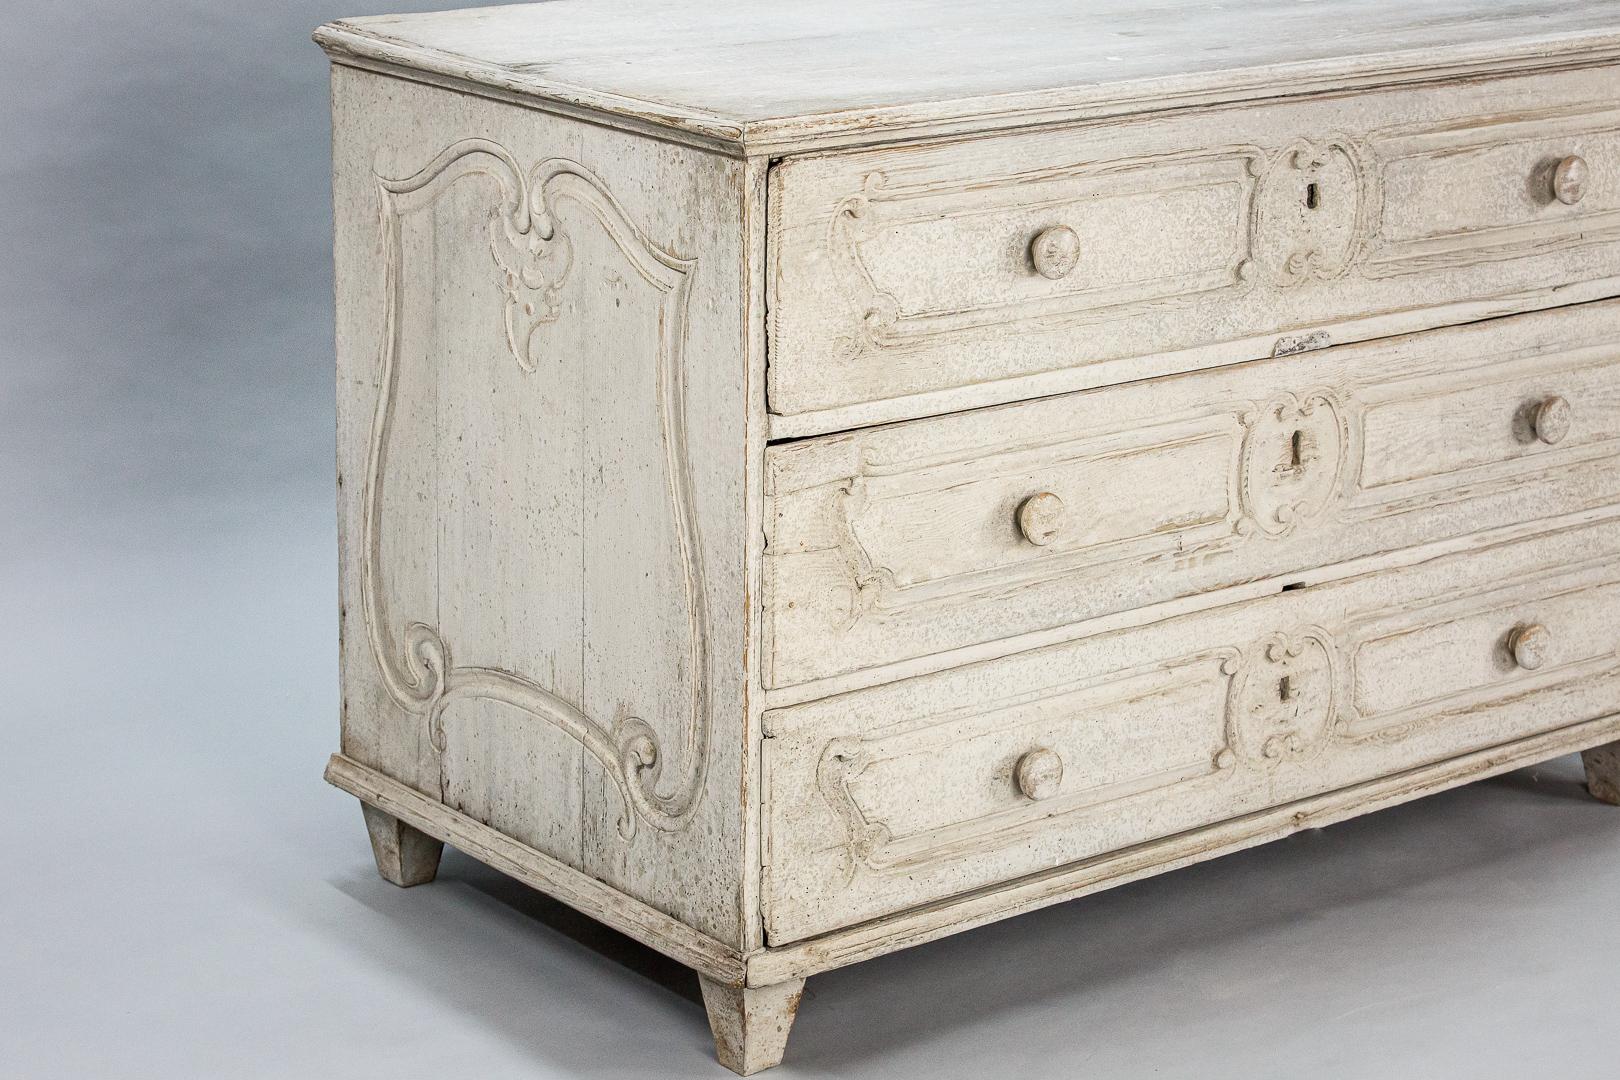 Wood Early 19th Century Commode or Chest of Drawers